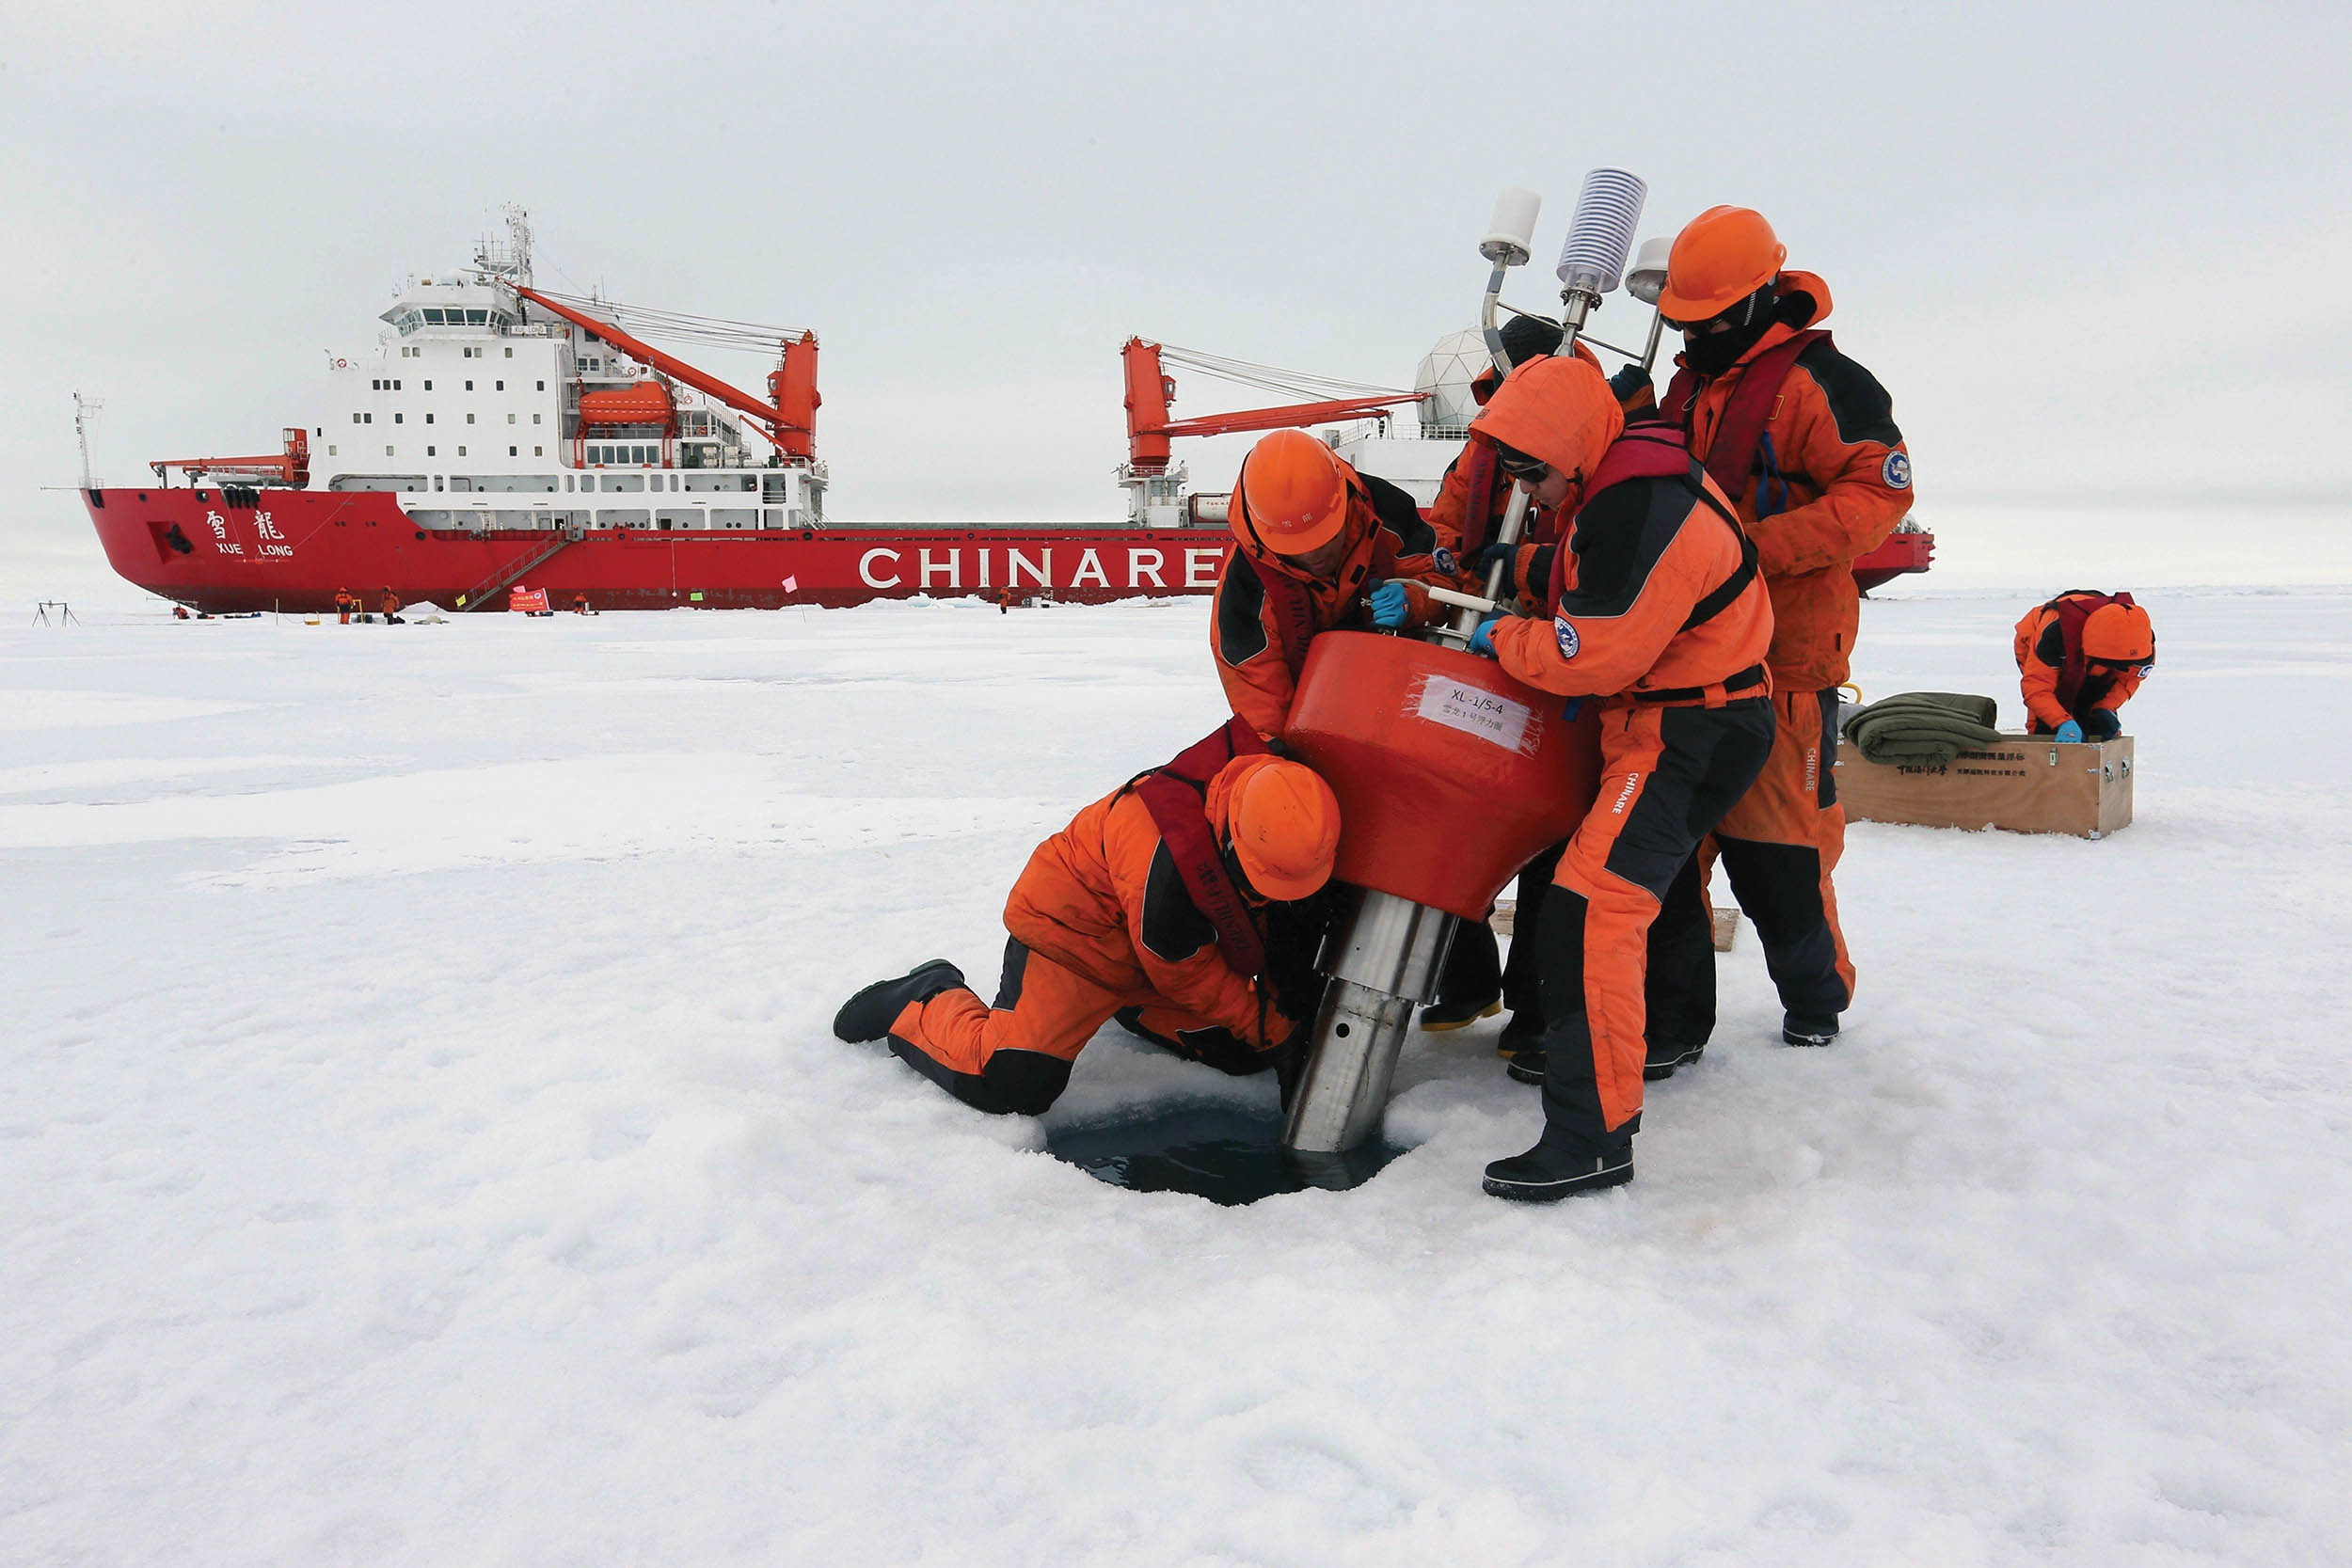 Members of China’s research team set up ocean profiling float at short-term data acquisition location near icebreaker Xuelong, or “Snow Dragon,” in Arctic Ocean, August 18, 2016 (Xinhua/Alamy Live News/Wu Yue)